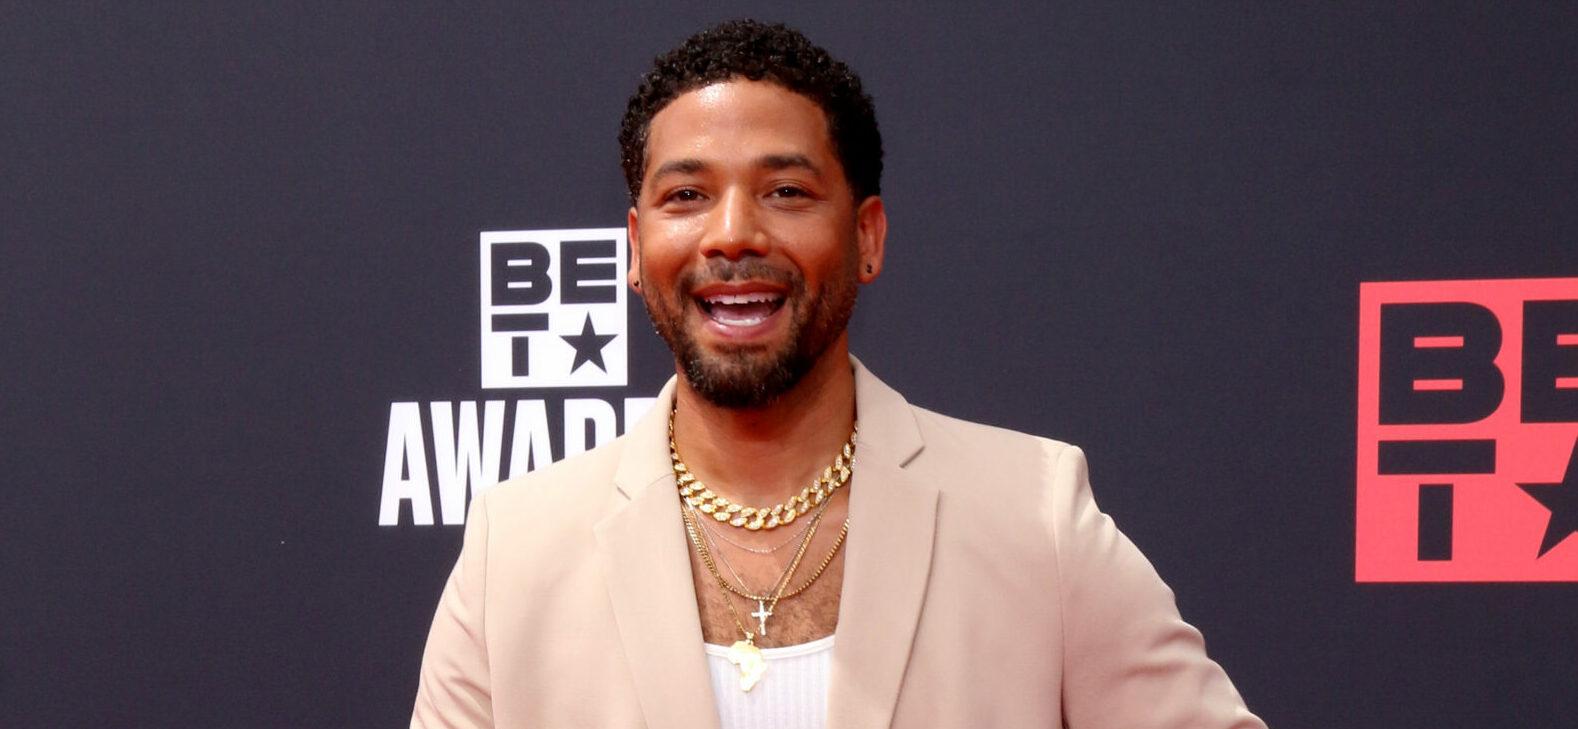 Jussie Smollett Gets Called Out Following His Surprise Appearance At The Bet Awards